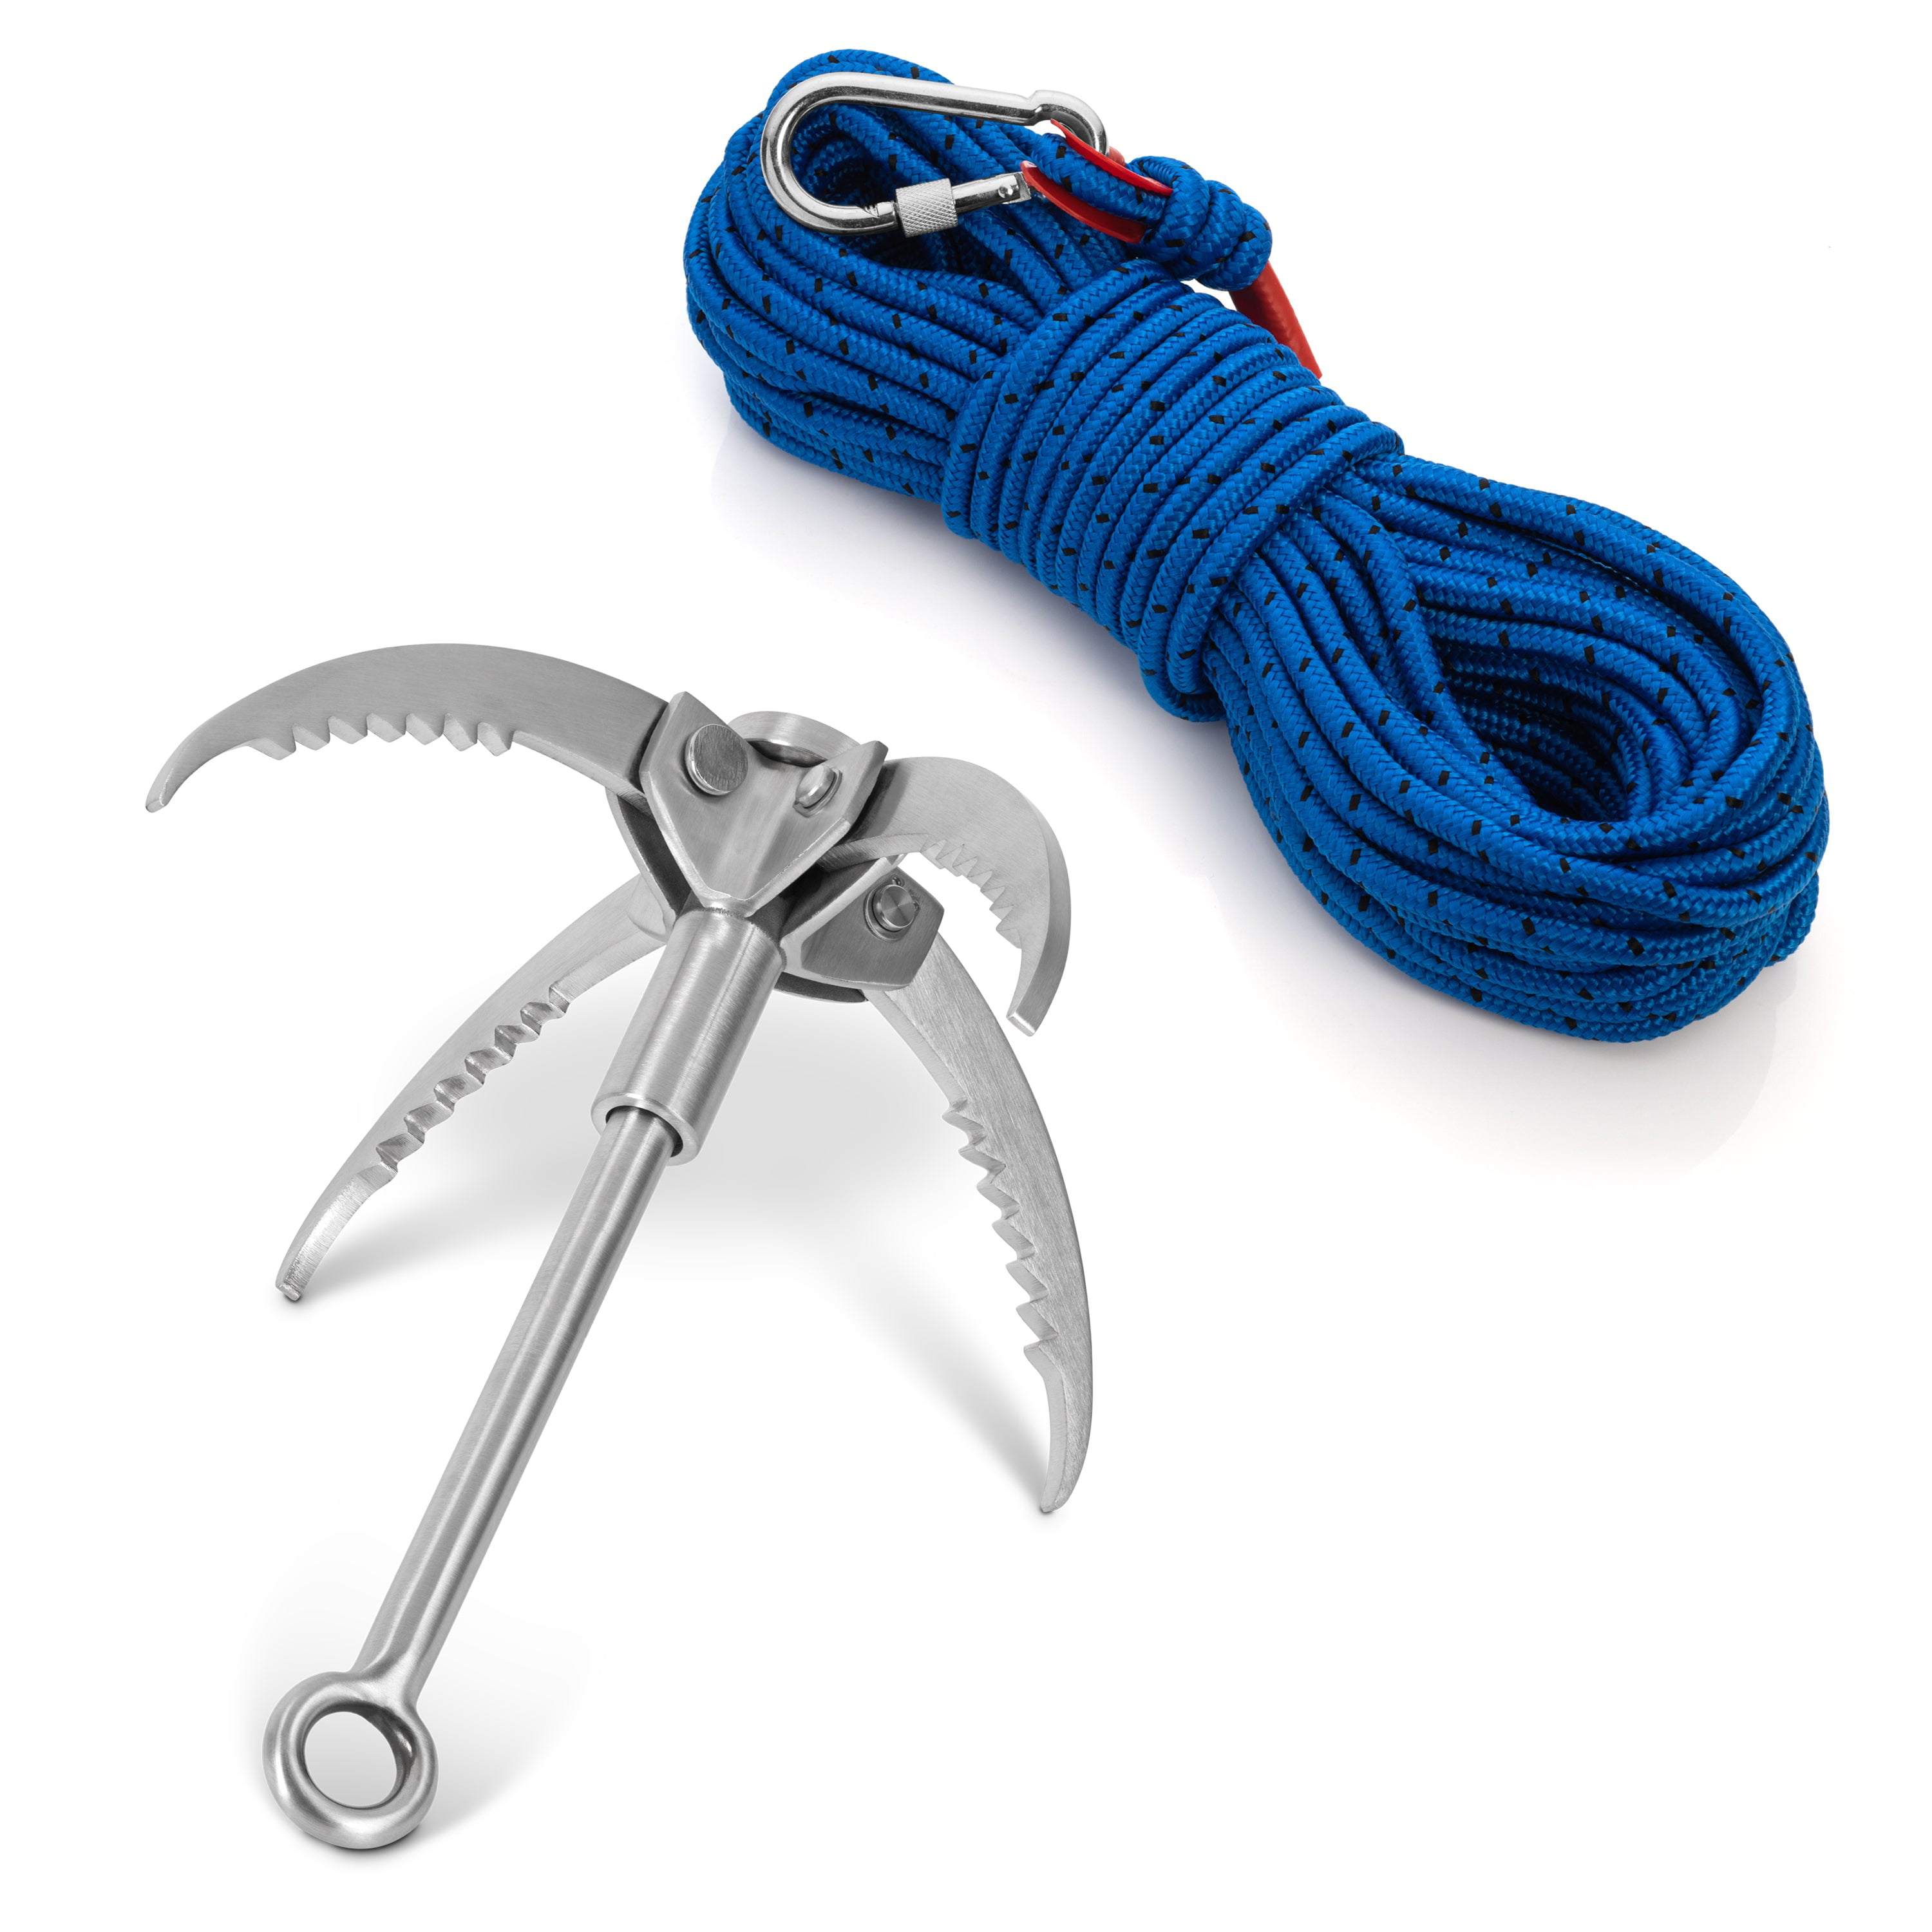 Grappling Hook Kit - Heavy Duty 4 Claw Grappling Hook Stainless Steel + Rope  1/3 Inch 1200LB Strength, Large Throwable Grapple Claw 